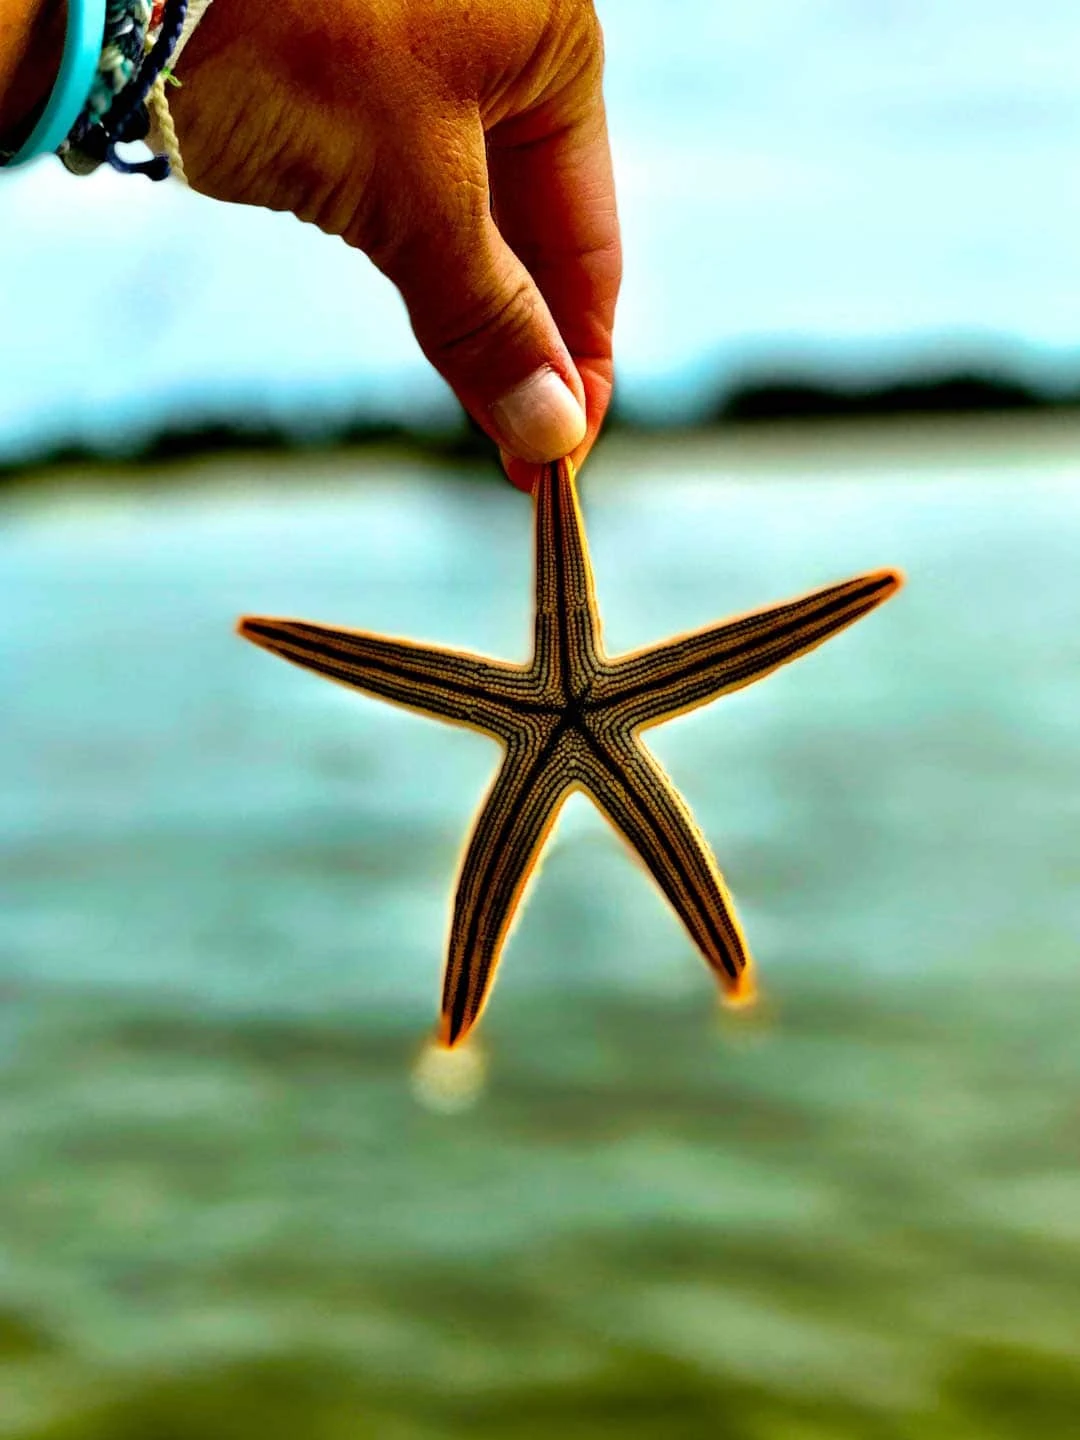 Image of woman's hand holding a starfish